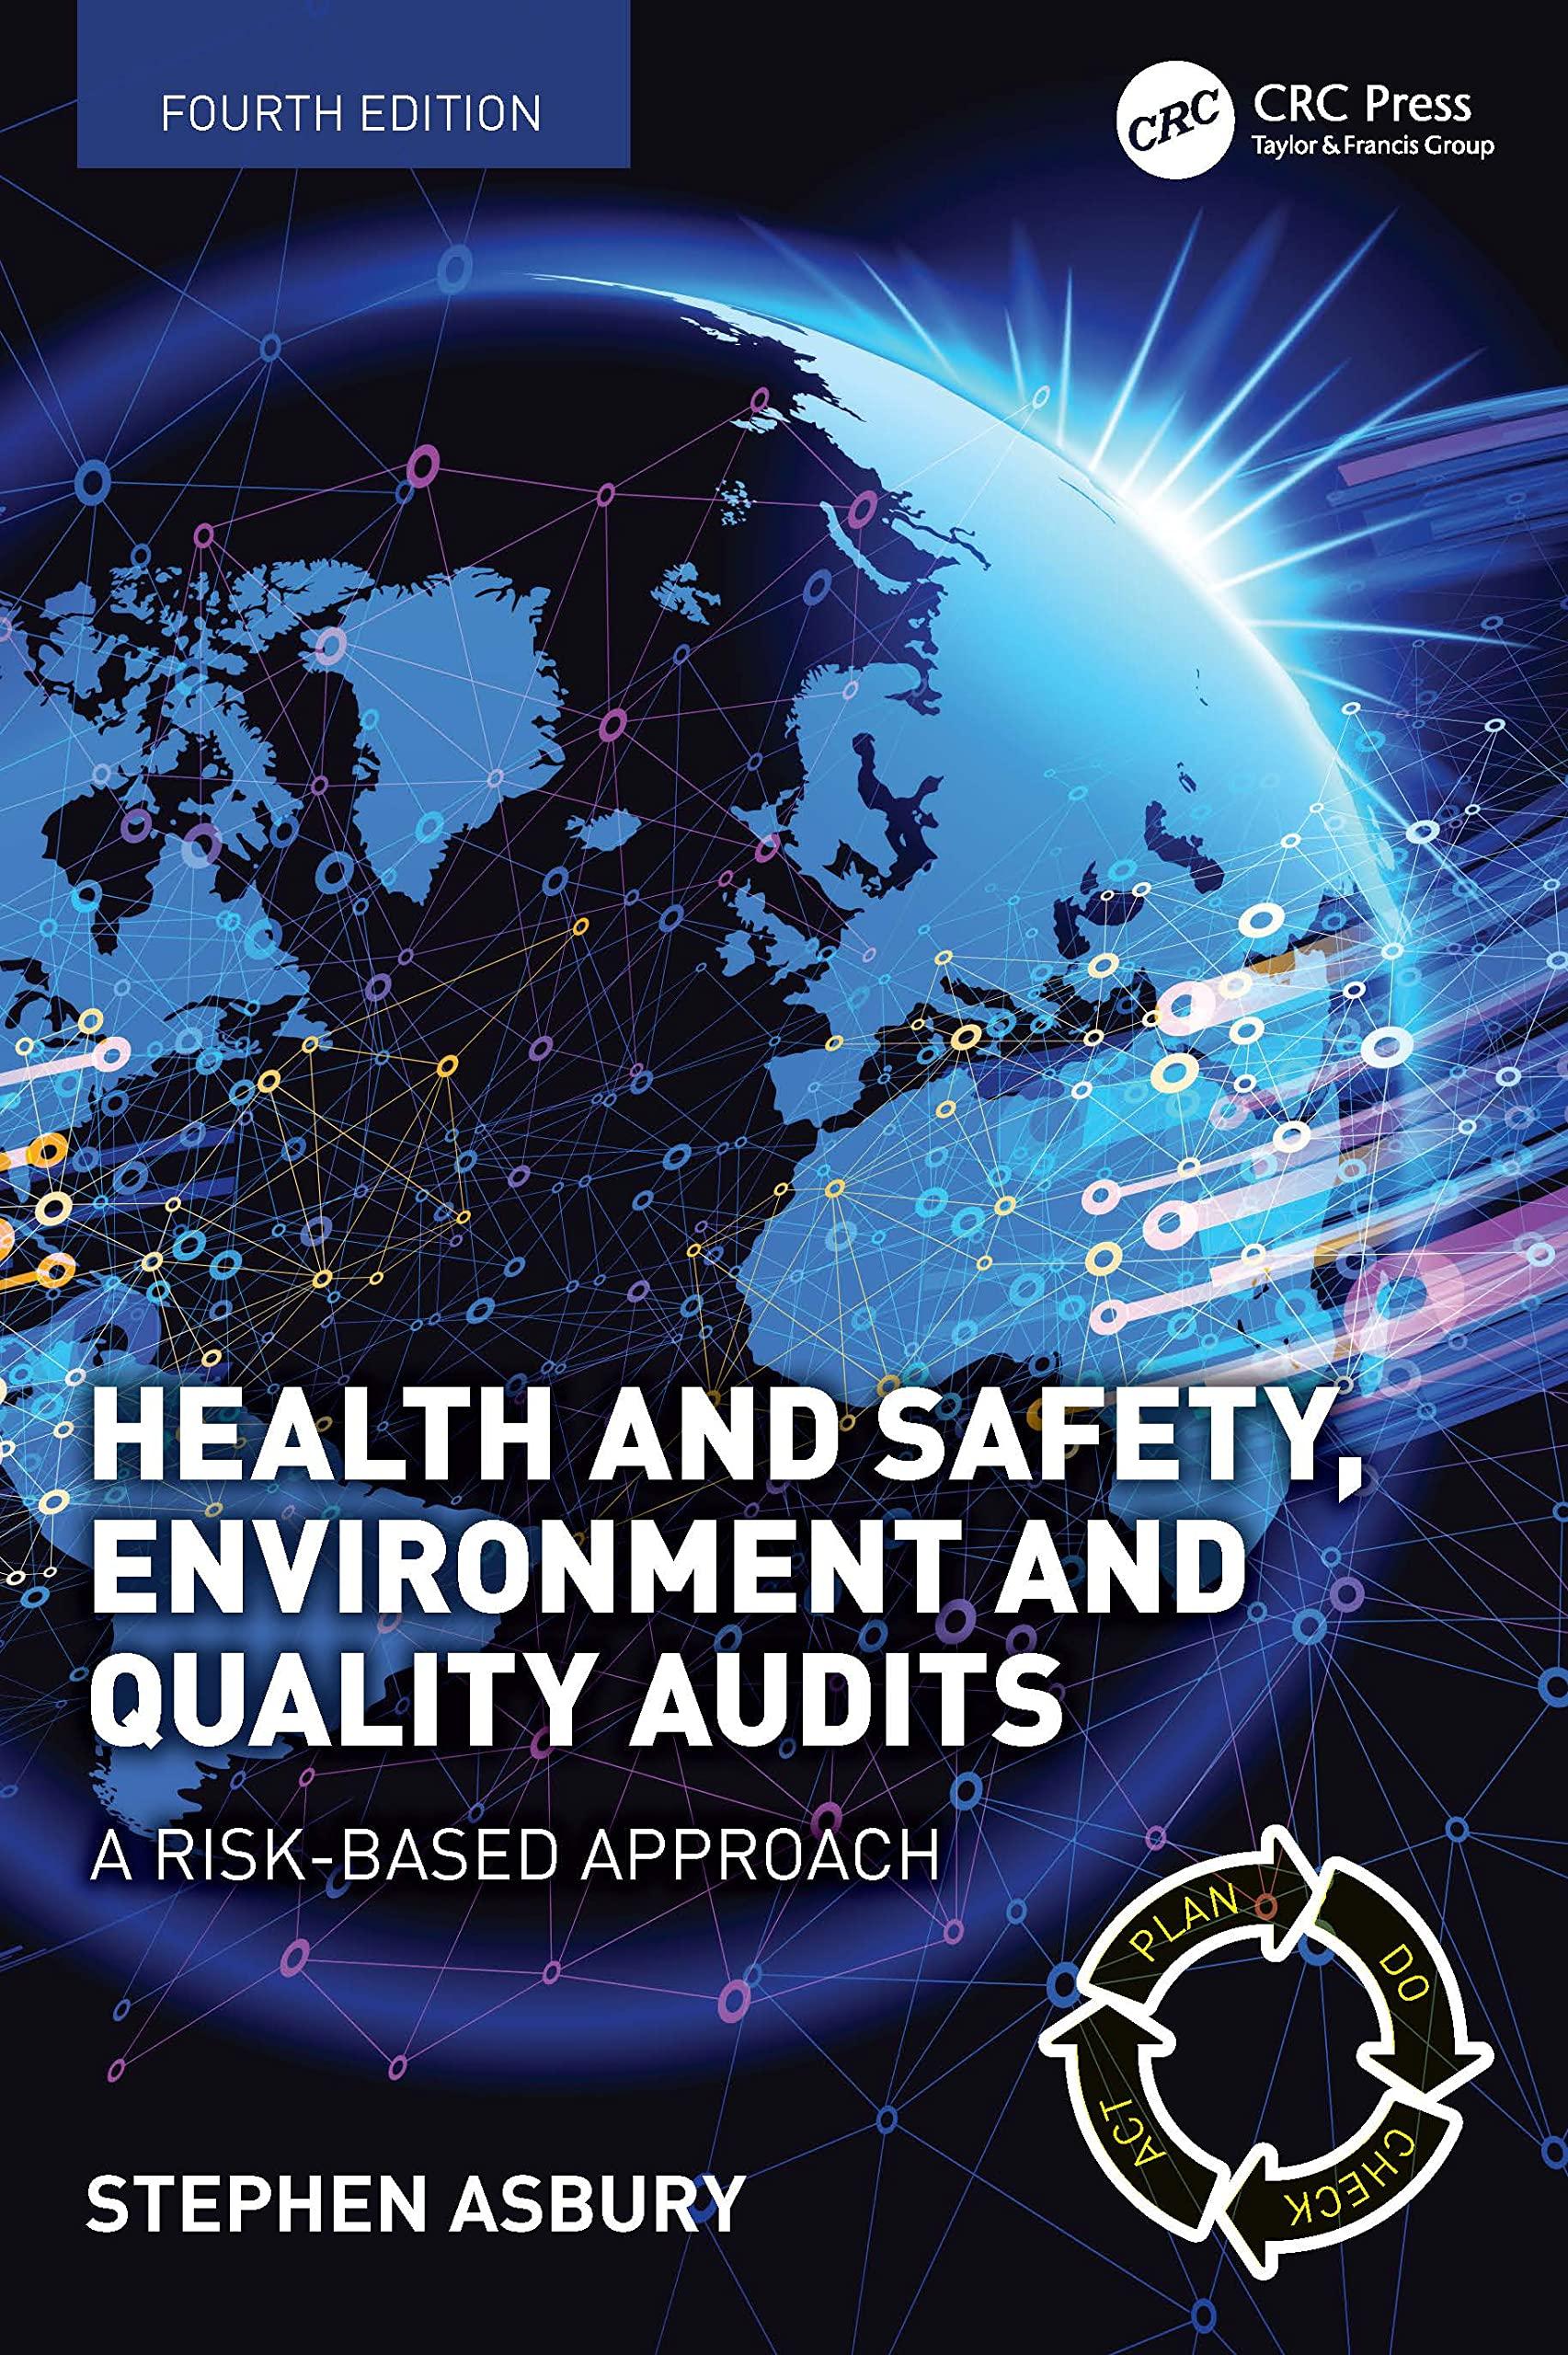 health and safety environment and quality audits a risk based approach 4th edition stephen asbury 1032427574,